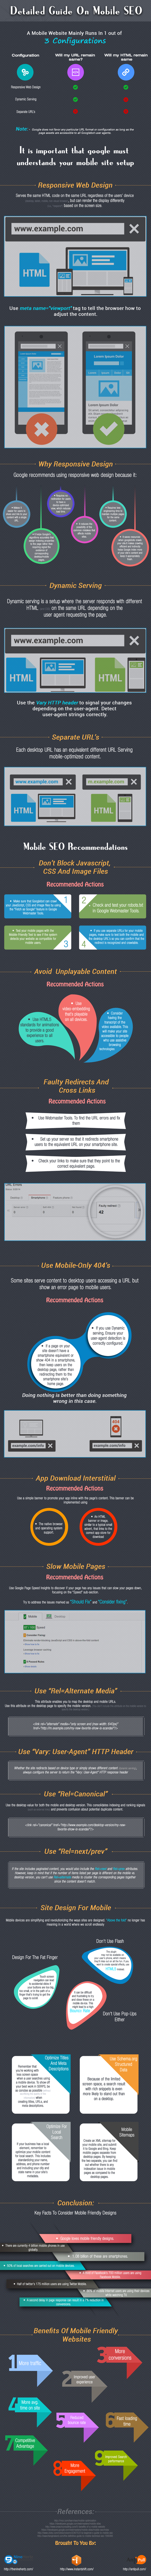 Plan A Link - Detailed Guide on Mobile SEO